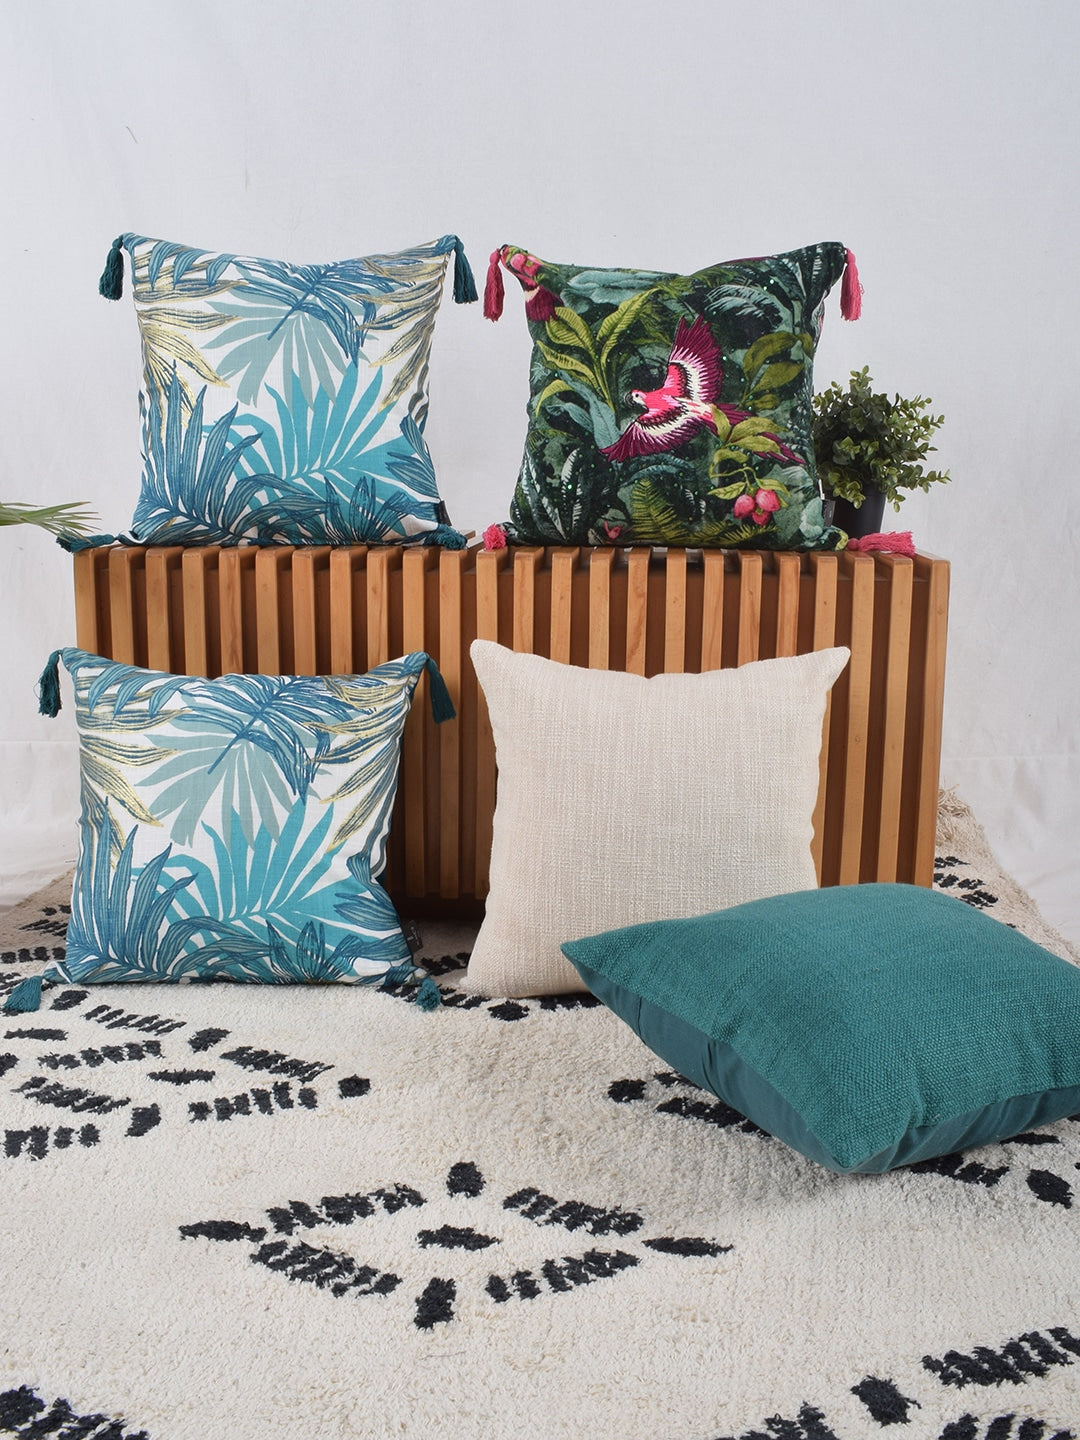 Blanc9 Set of 5 Multicolored Printed and Solid 40x40 CM Cushion Covers